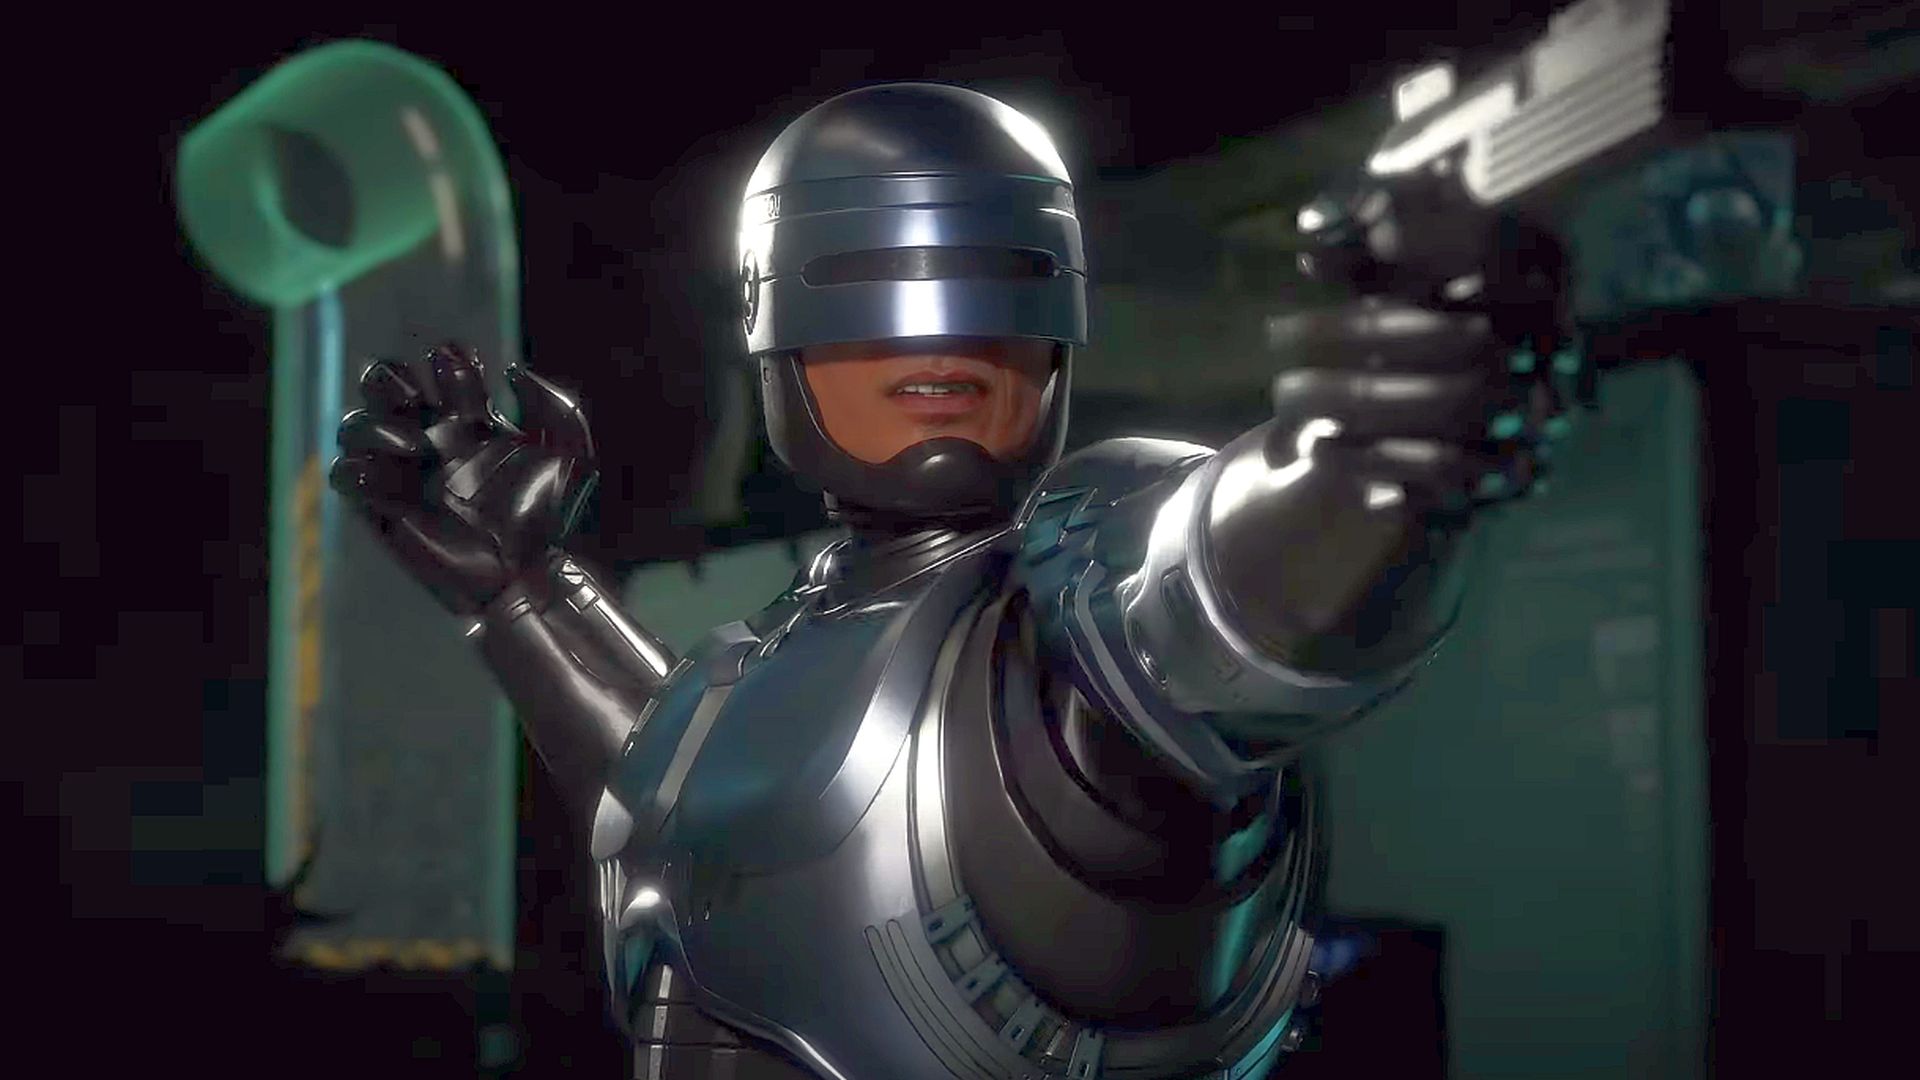 Mortal Kombat 11 Aftermath Is A Story Dlc With A New Campaign Fighters And Robocop 7062